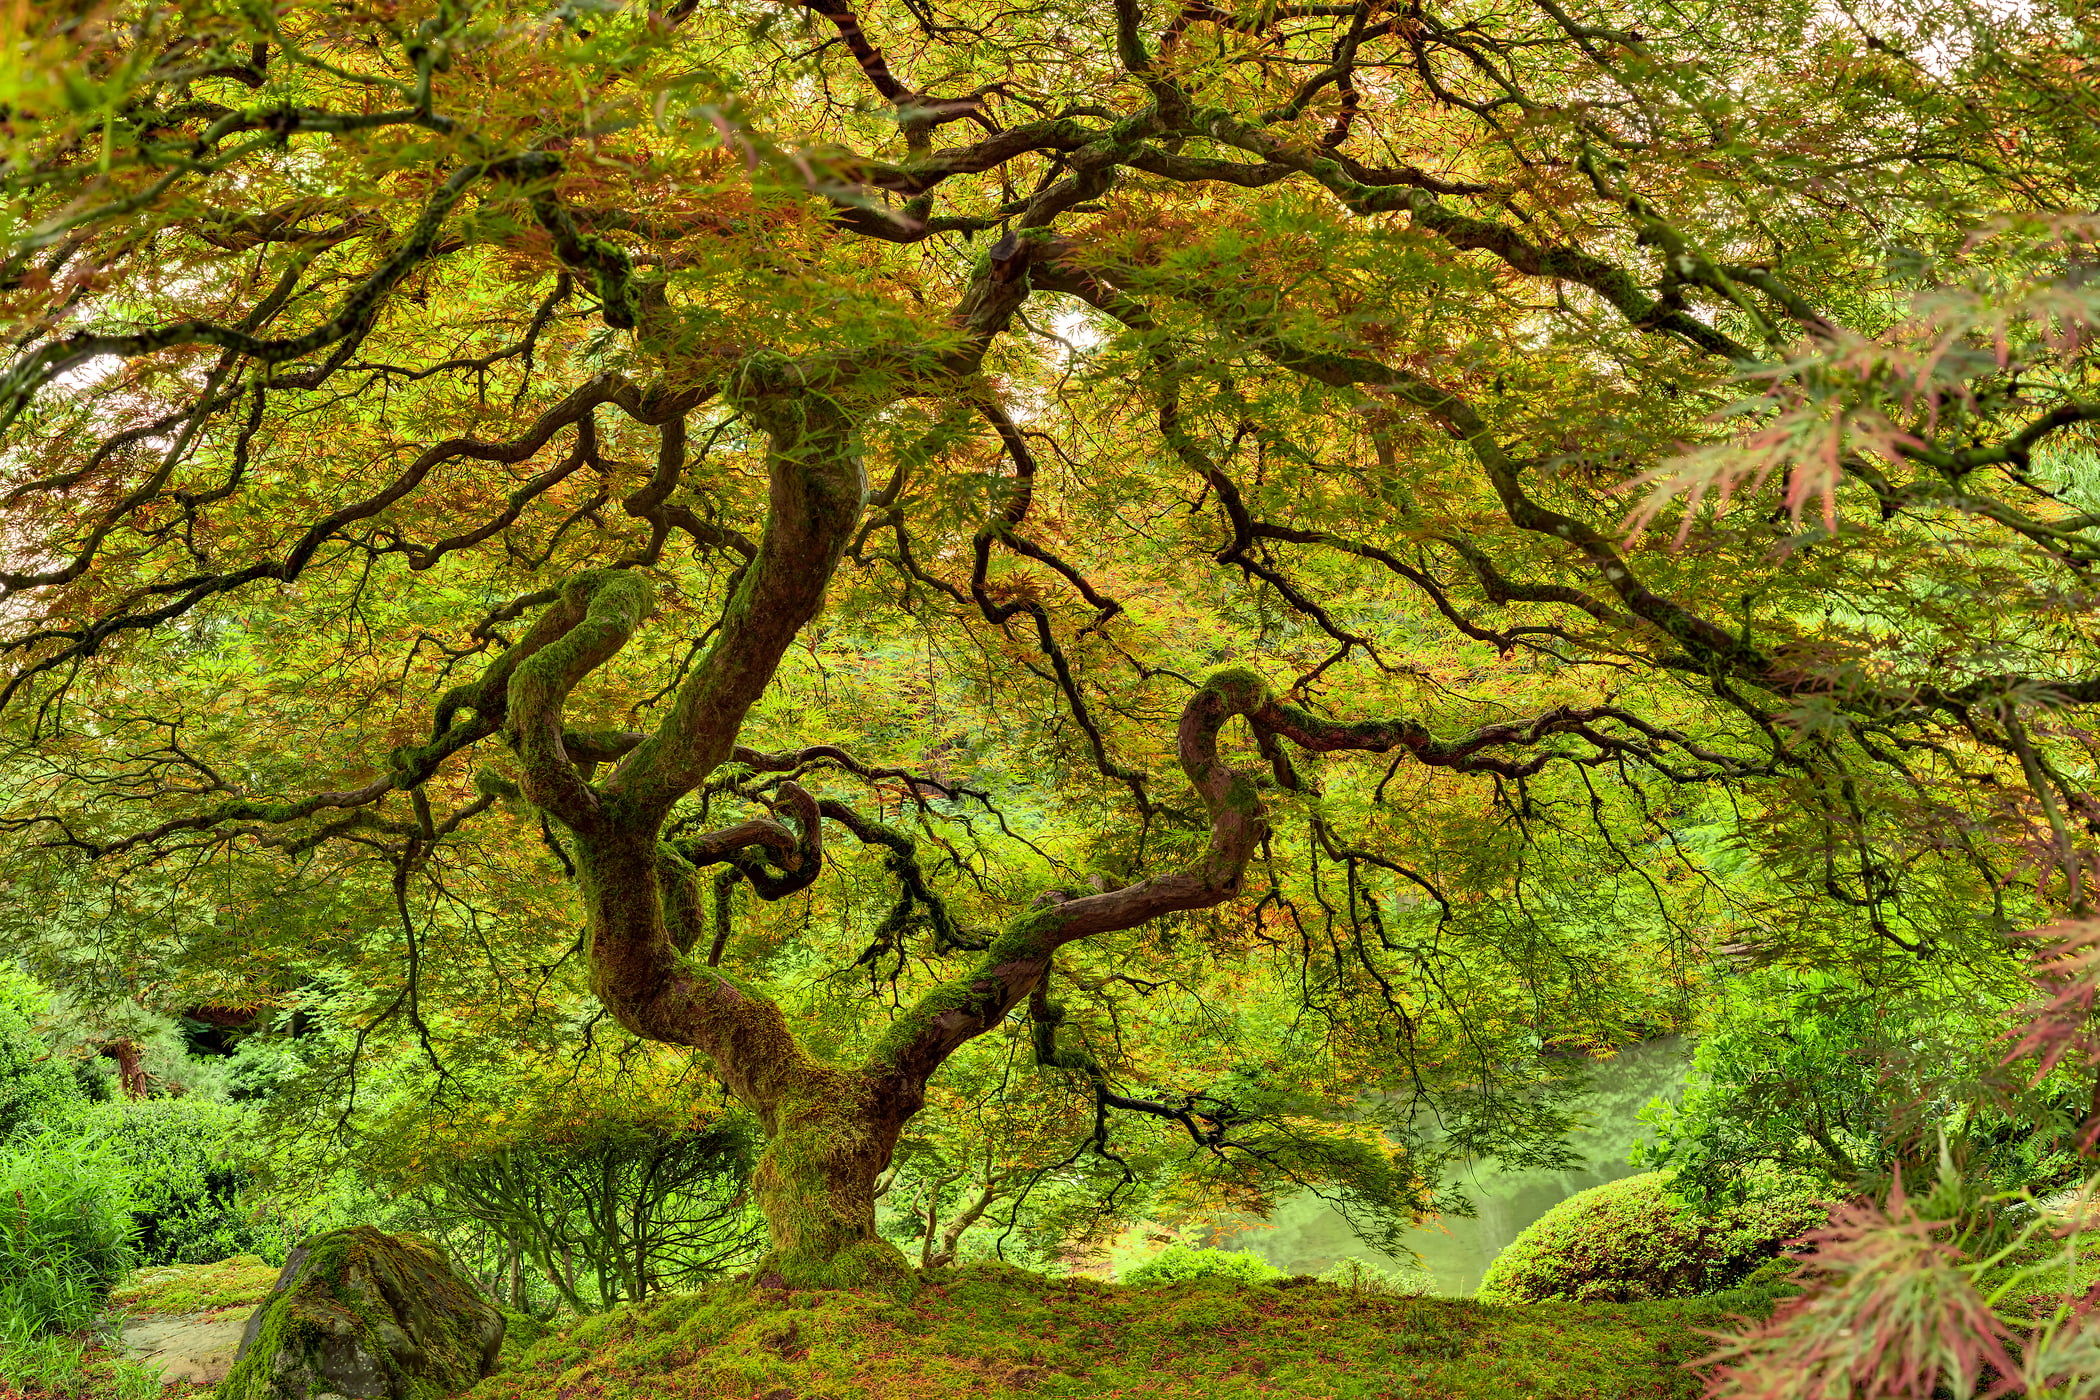 246 megapixels! A very high resolution, large-format VAST photo print of a maple tree in a Japanese garden; photograph created by Tim Lo Monaco in Portland Japanese Garden, Washington Park, Portland, Oregon.